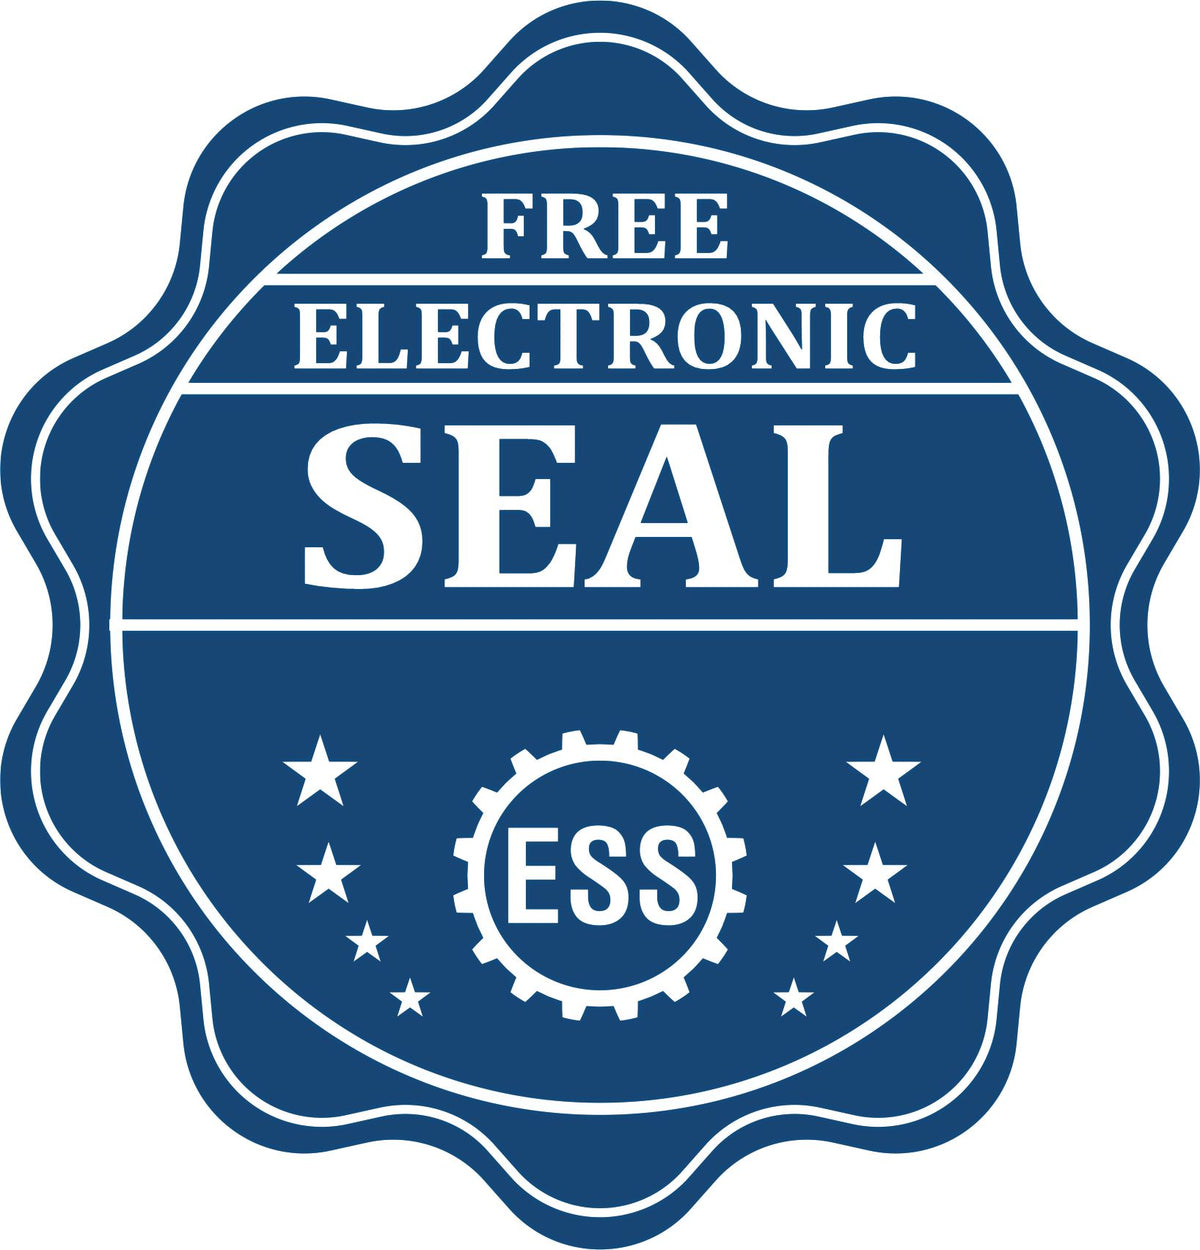 A badge showing a free electronic seal for the Handheld Missouri Architect Seal Embosser with stars and the ESS gear on the emblem.